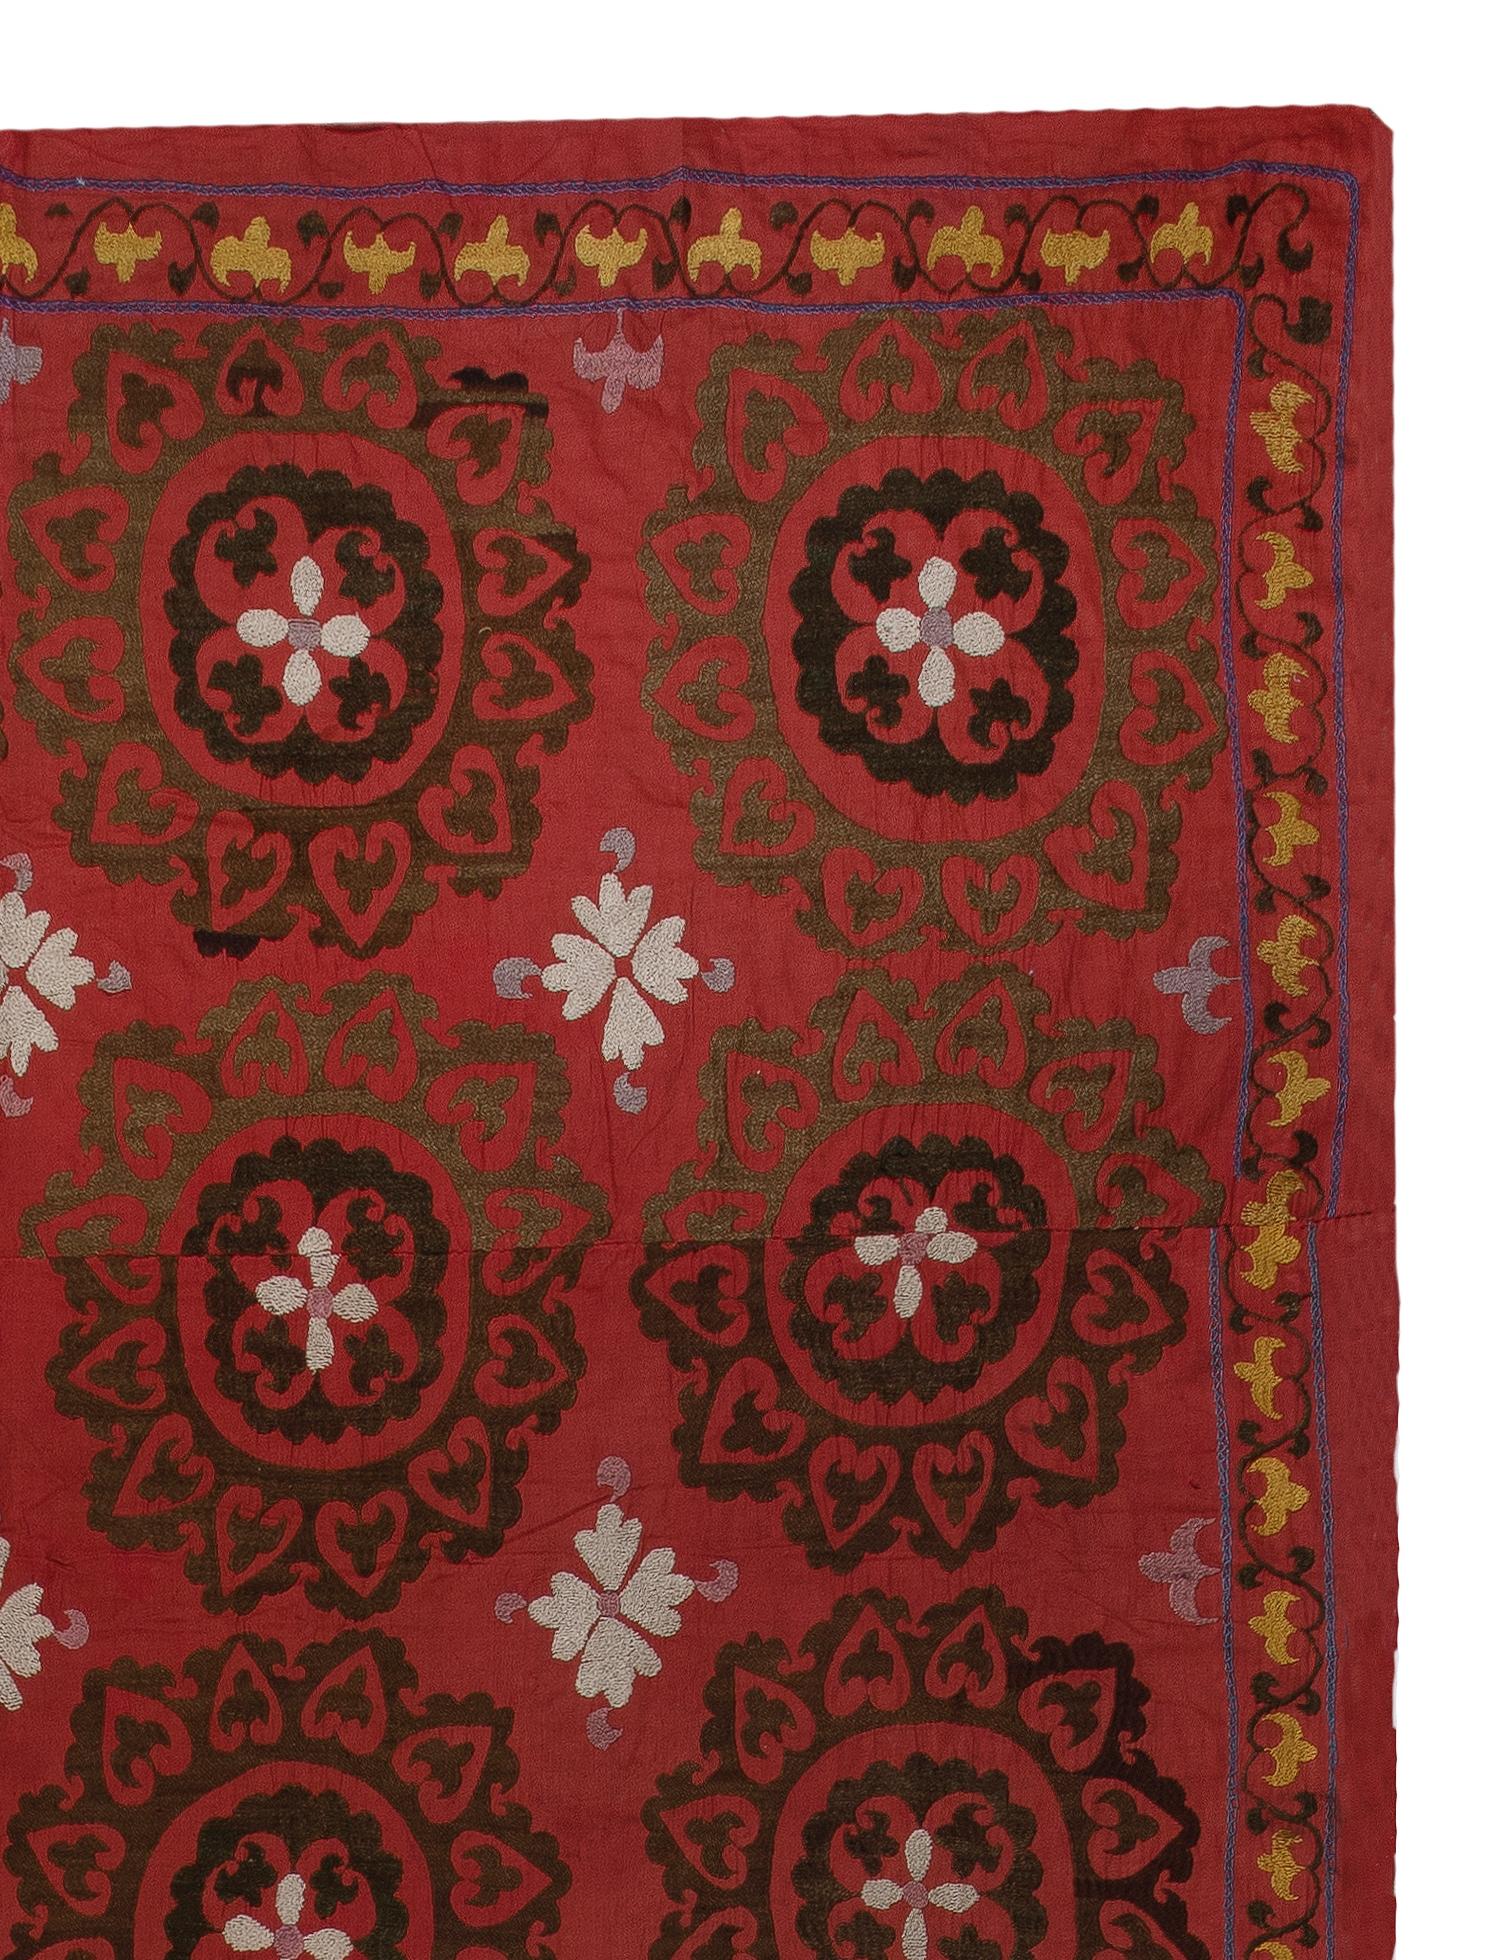 central asian floor covering